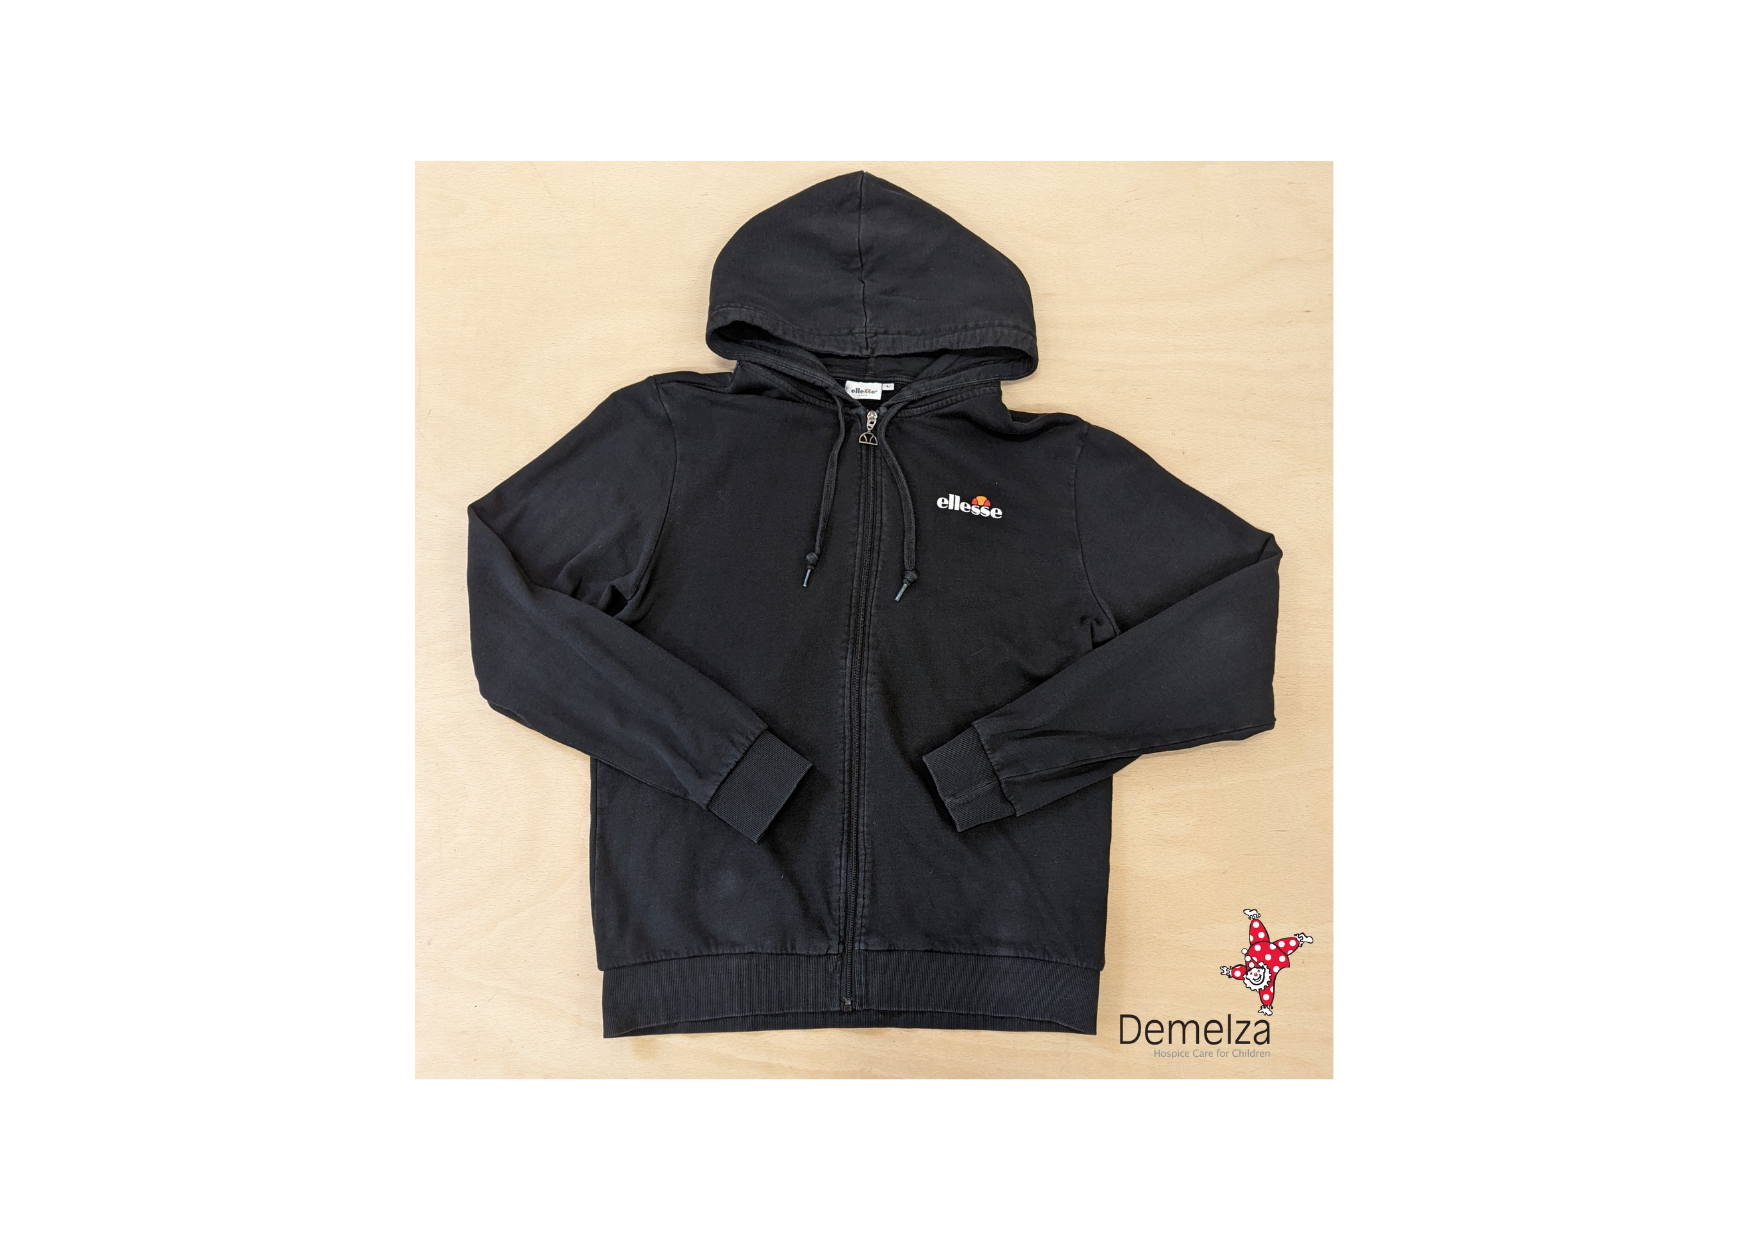 Black hoodie with small Ellesse spell out and logo to chest